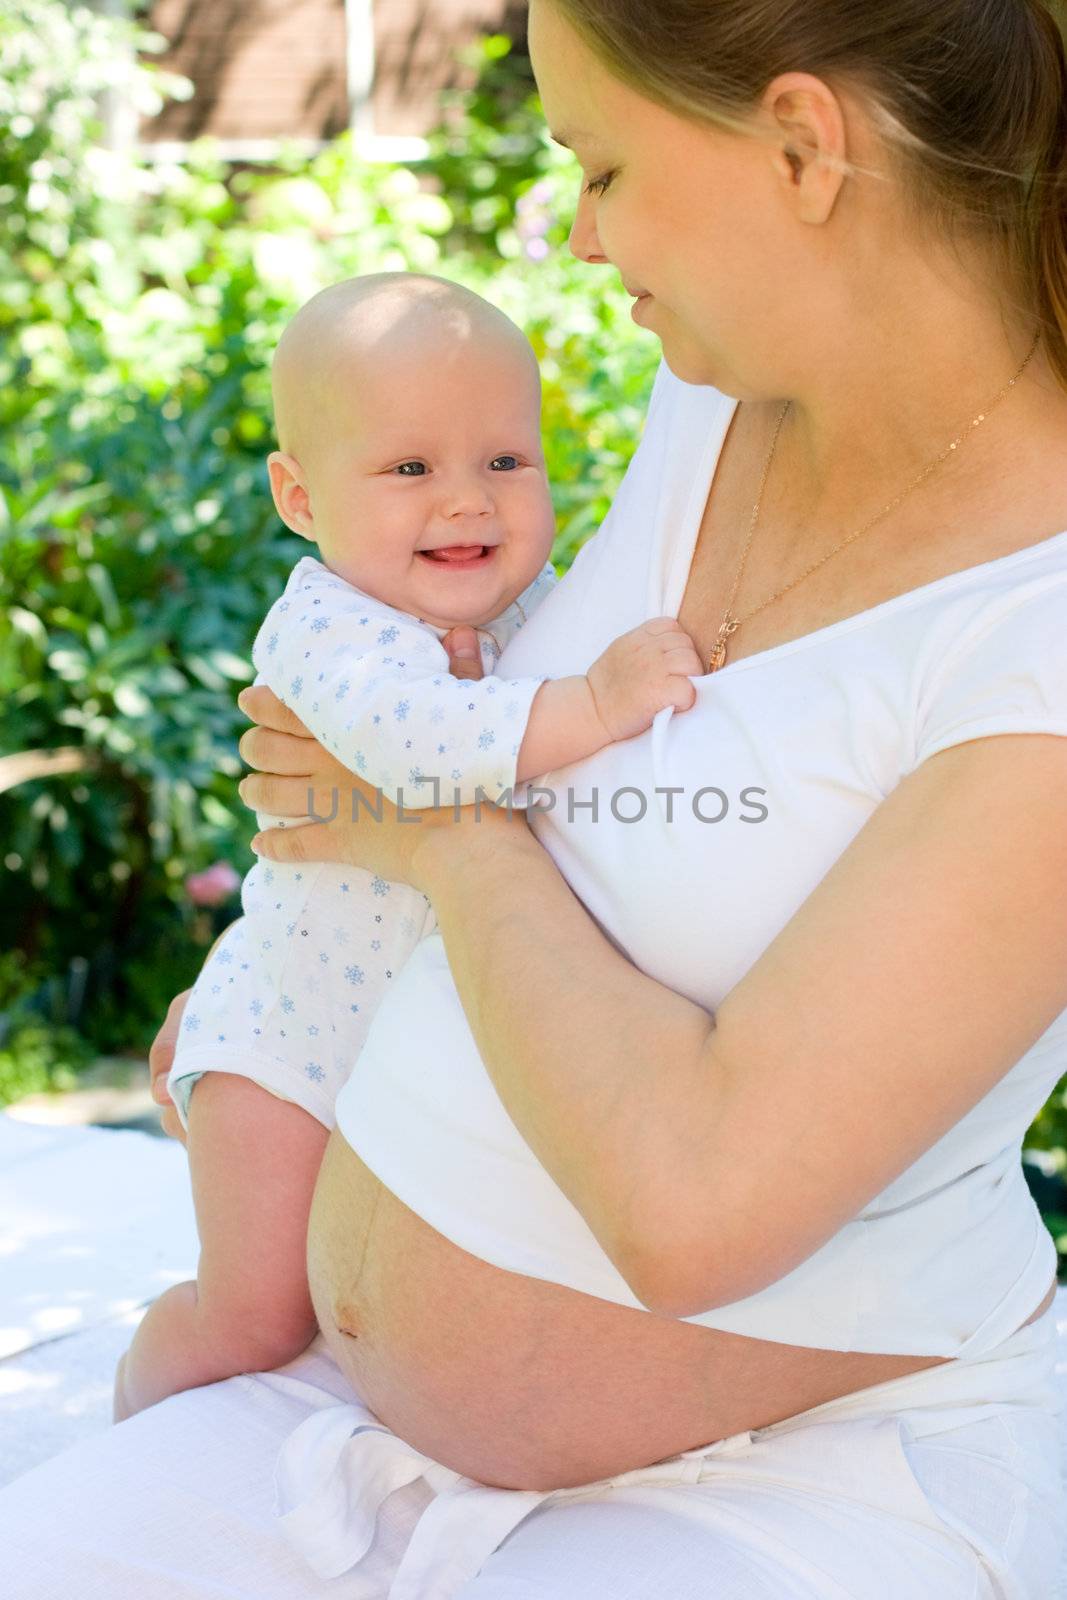 Pregnant woman with baby girl by naumoid